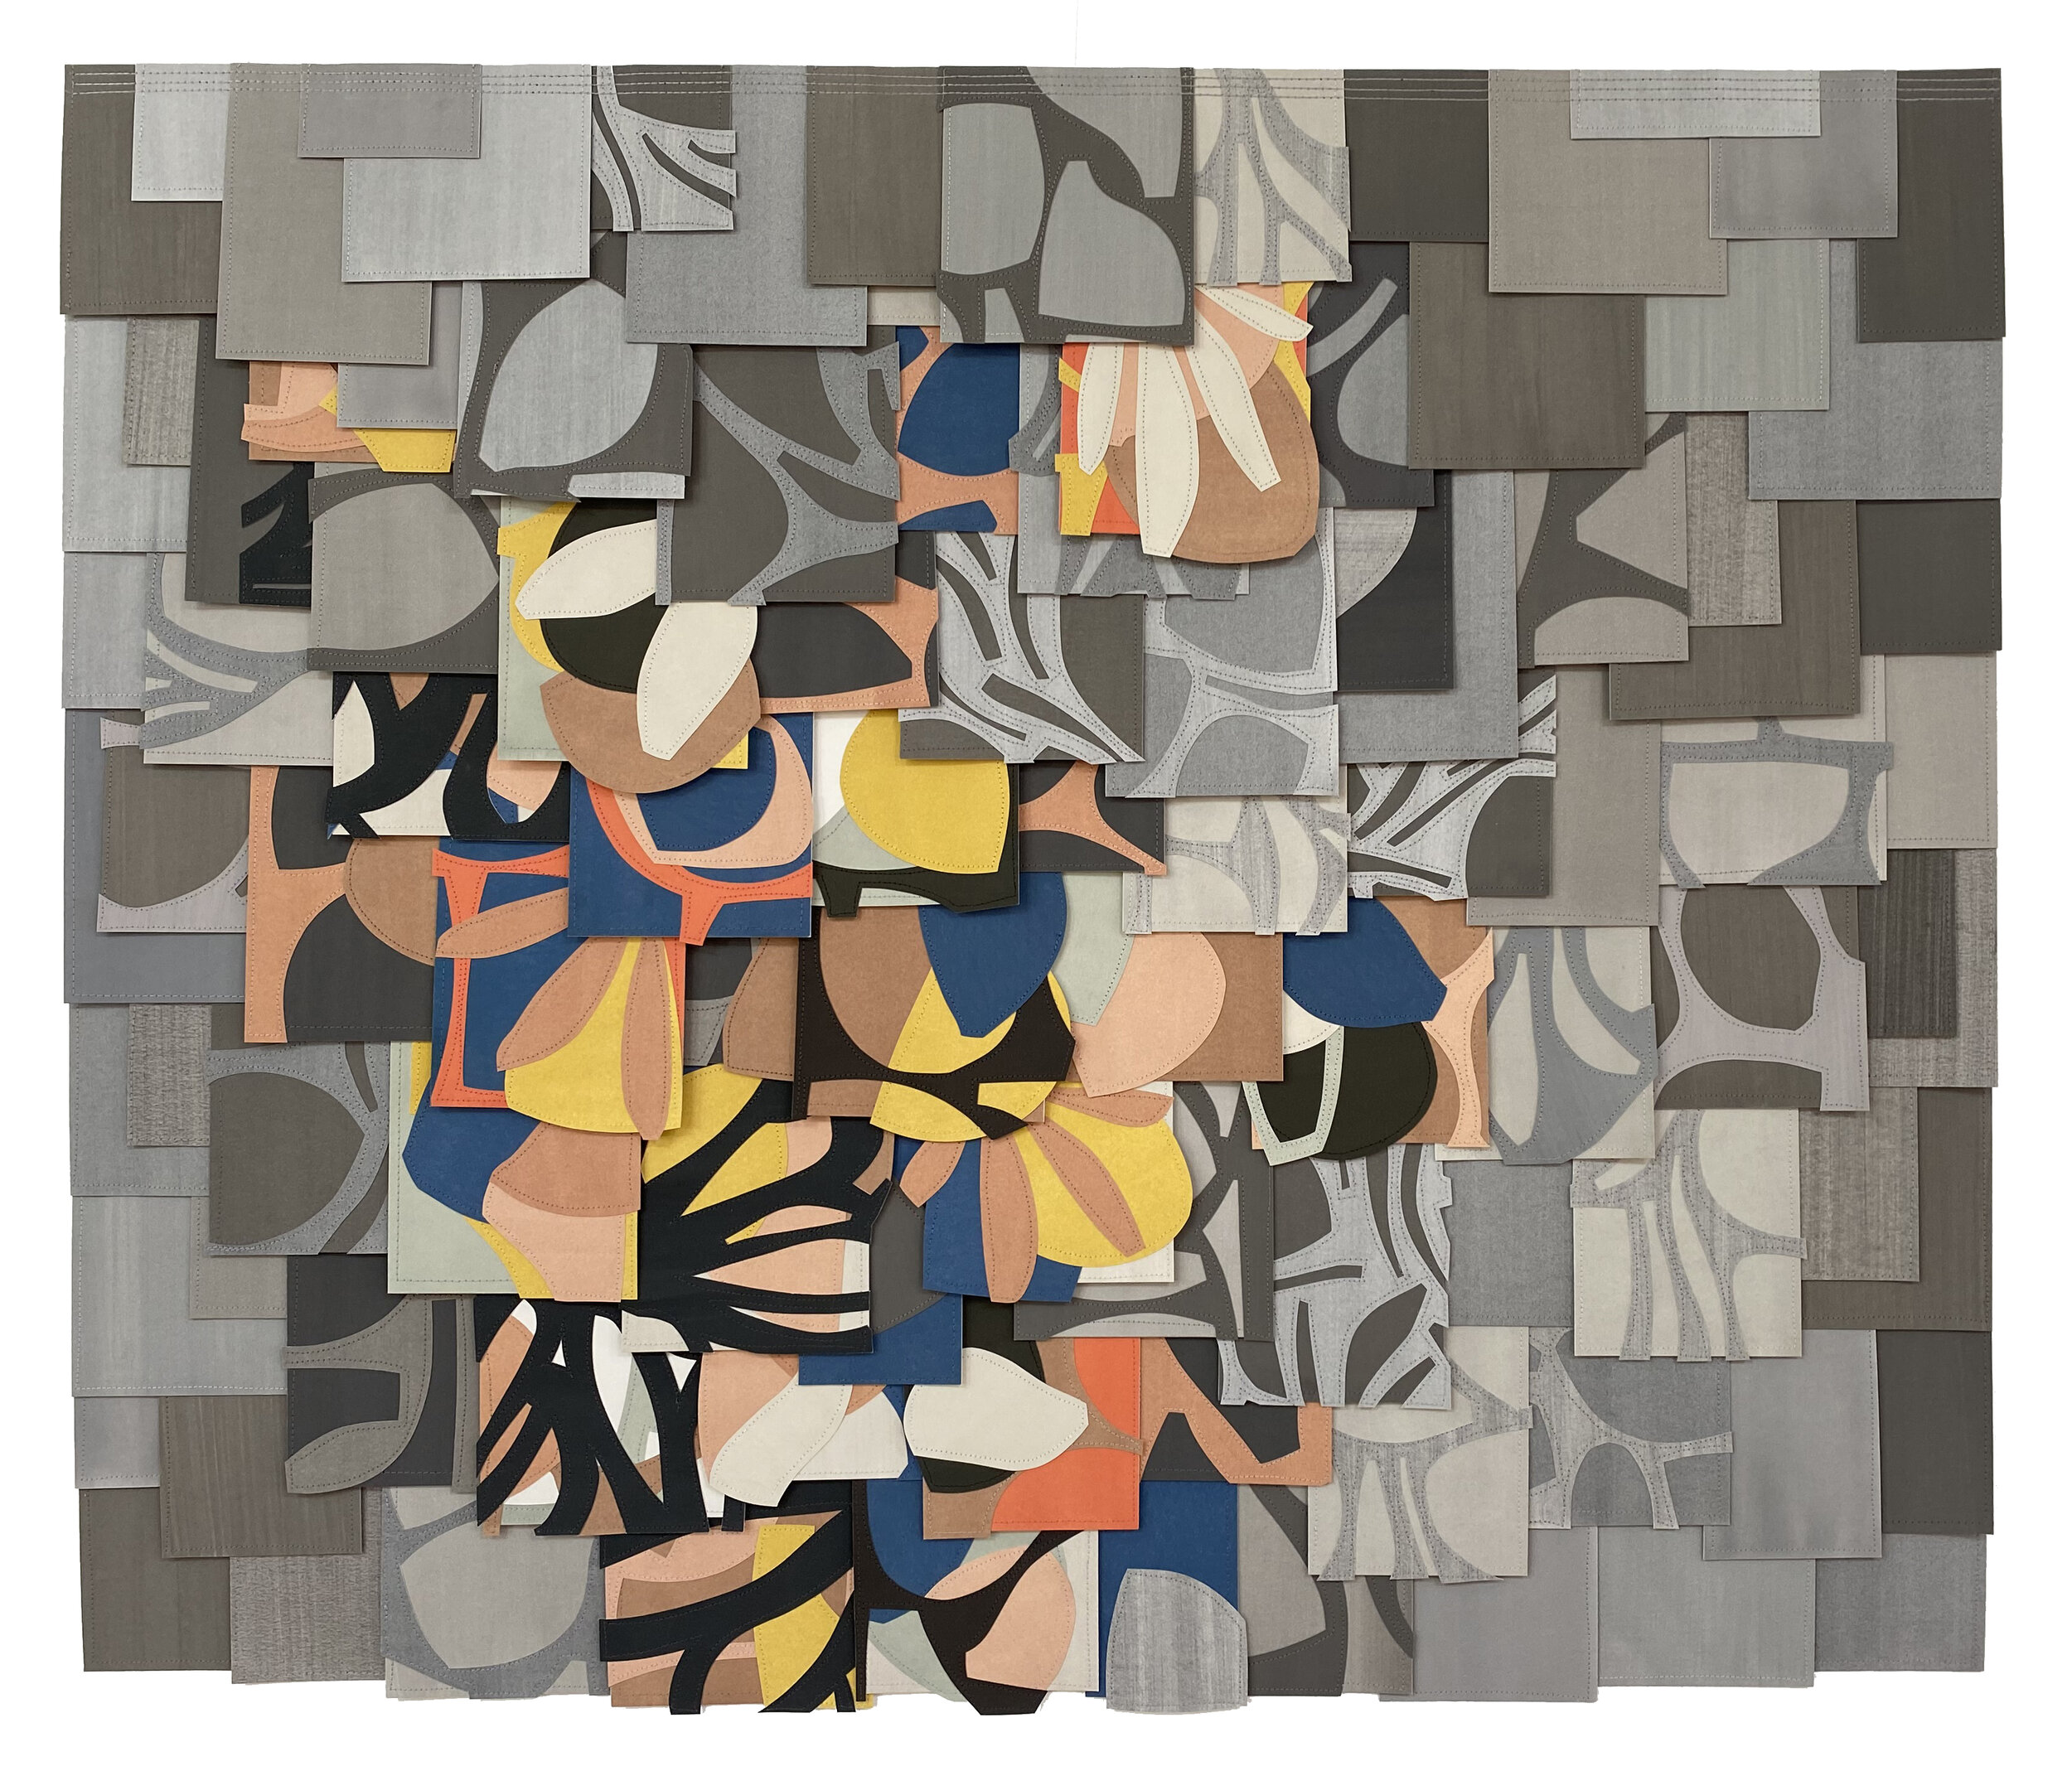 RAYMOND SAÁ | Untitled (PS202110), 36 x 42 inches / 91.5 x 106.5 cm, gouache collage on sewn paper, framed, 2021